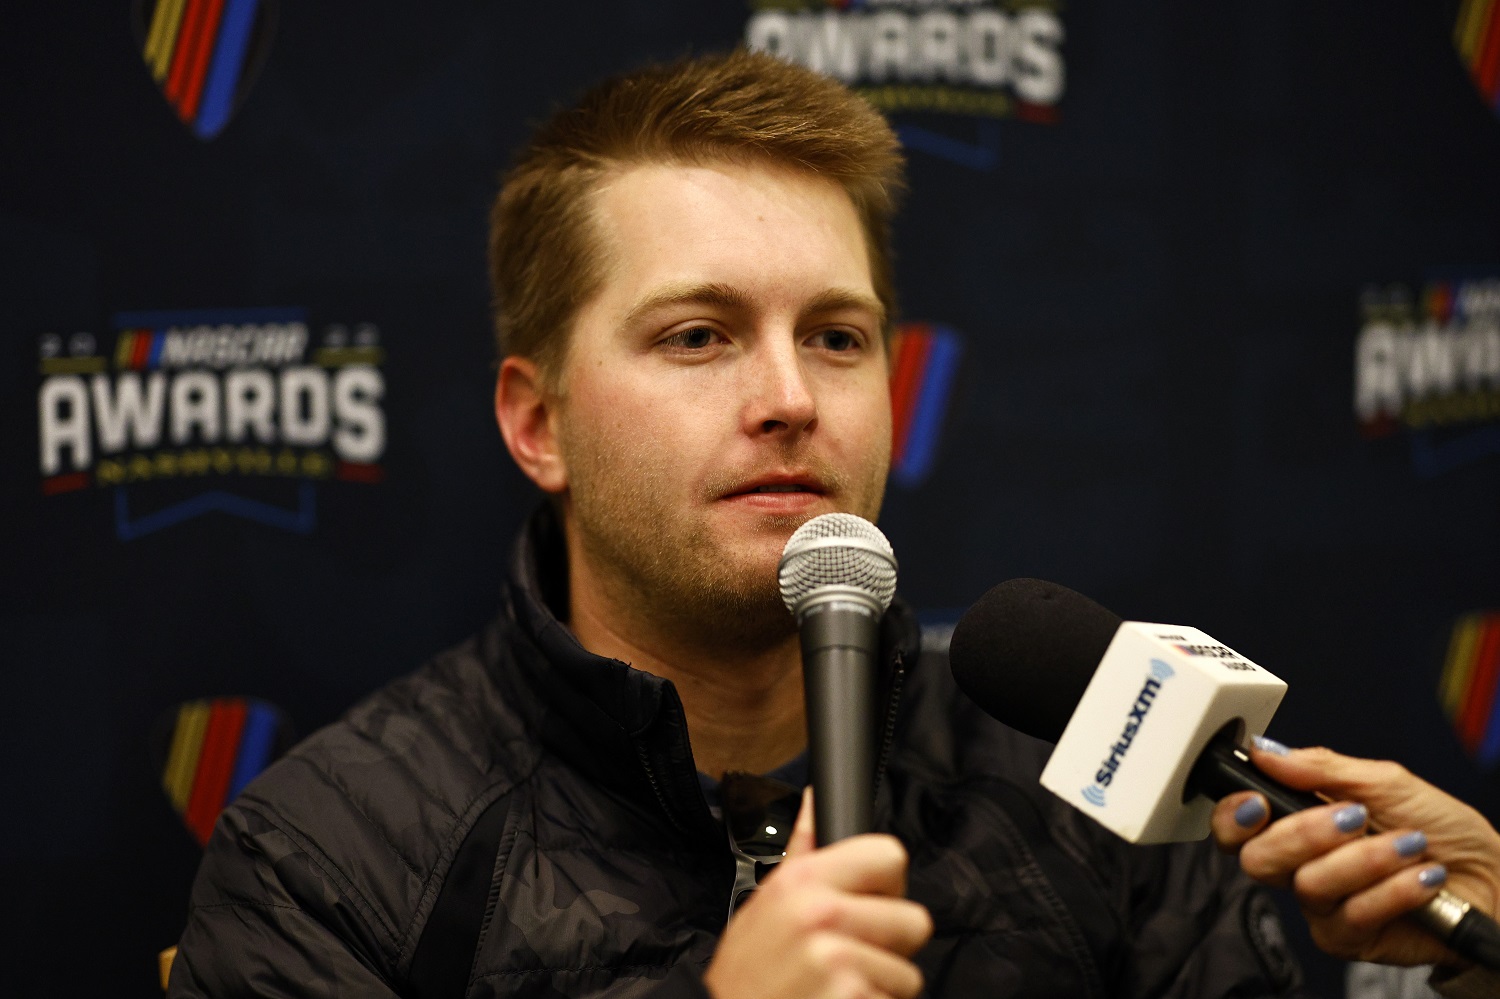 William Byron speaks with the media prior to the NASCAR Awards and Champion Celebration at the Music City Center on Dec. 2, 2022 in Nashville, Tennessee.